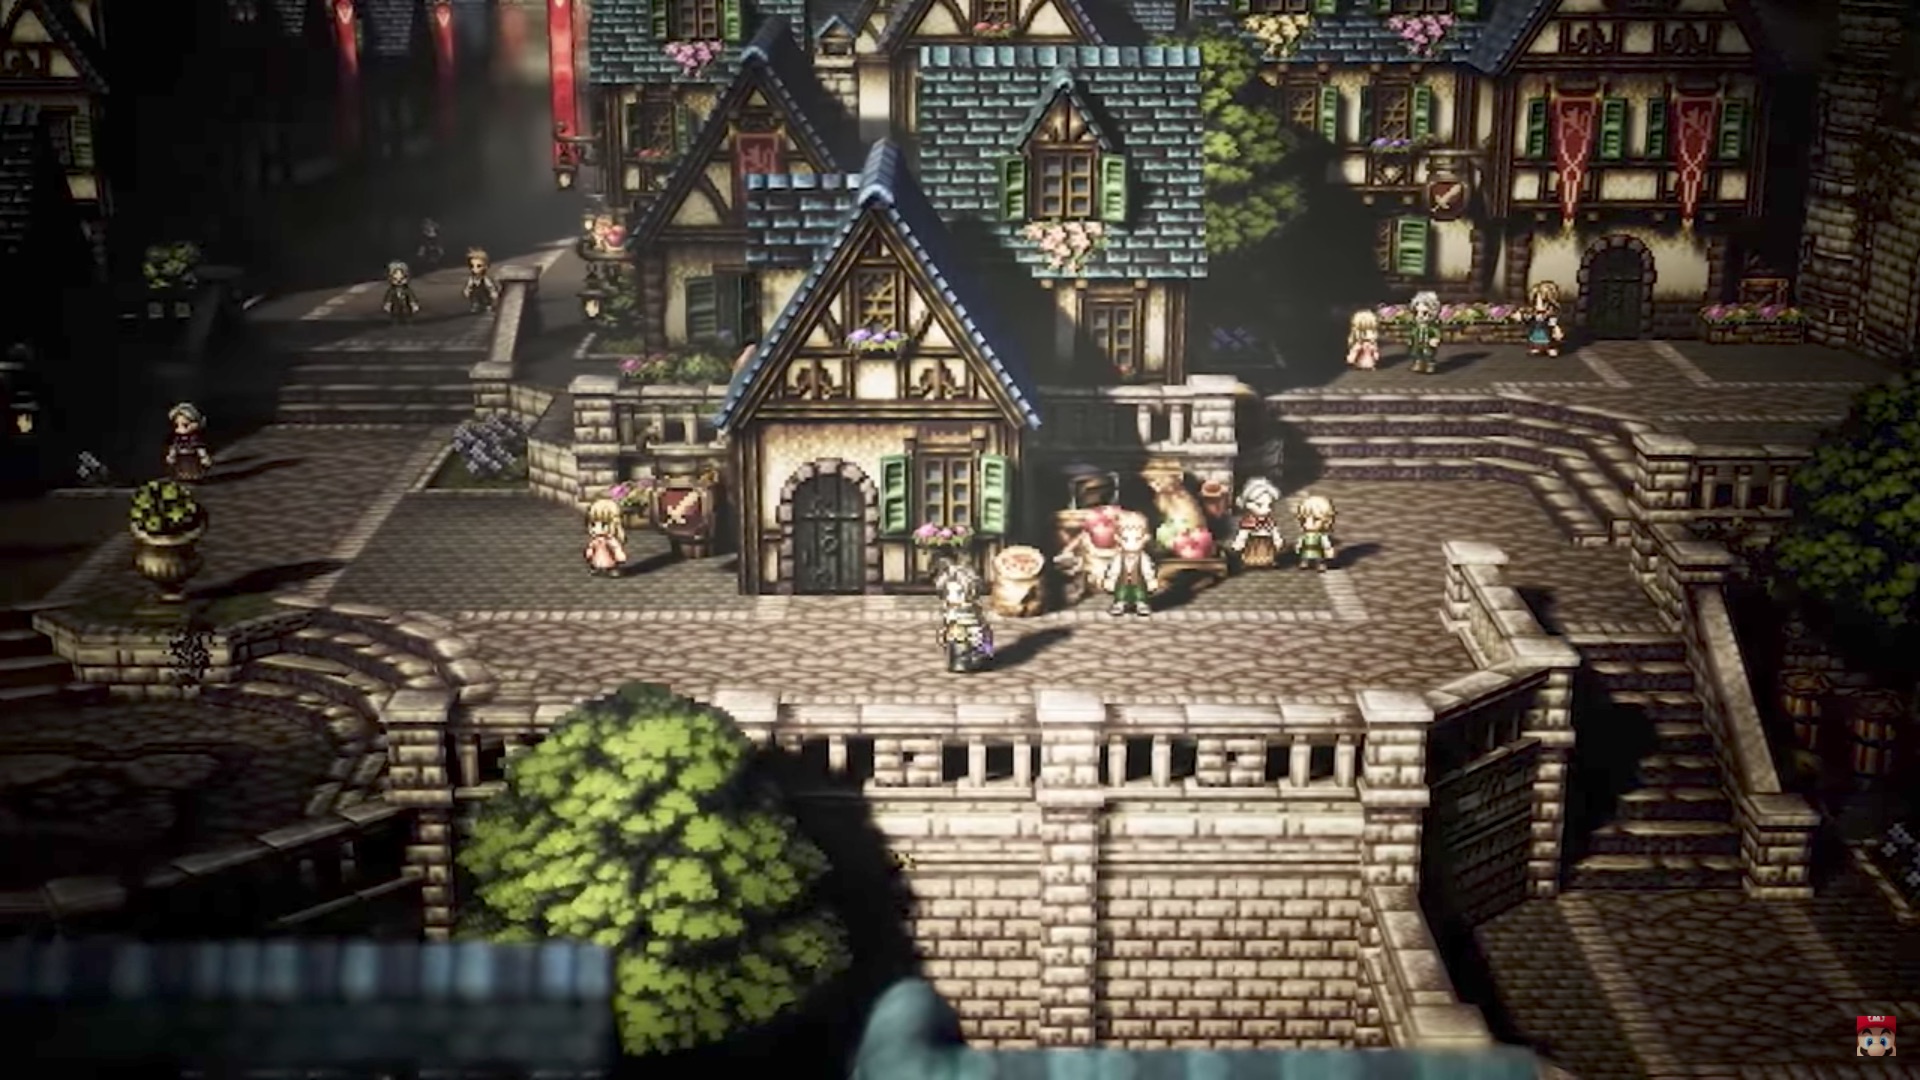 download octopath cotc